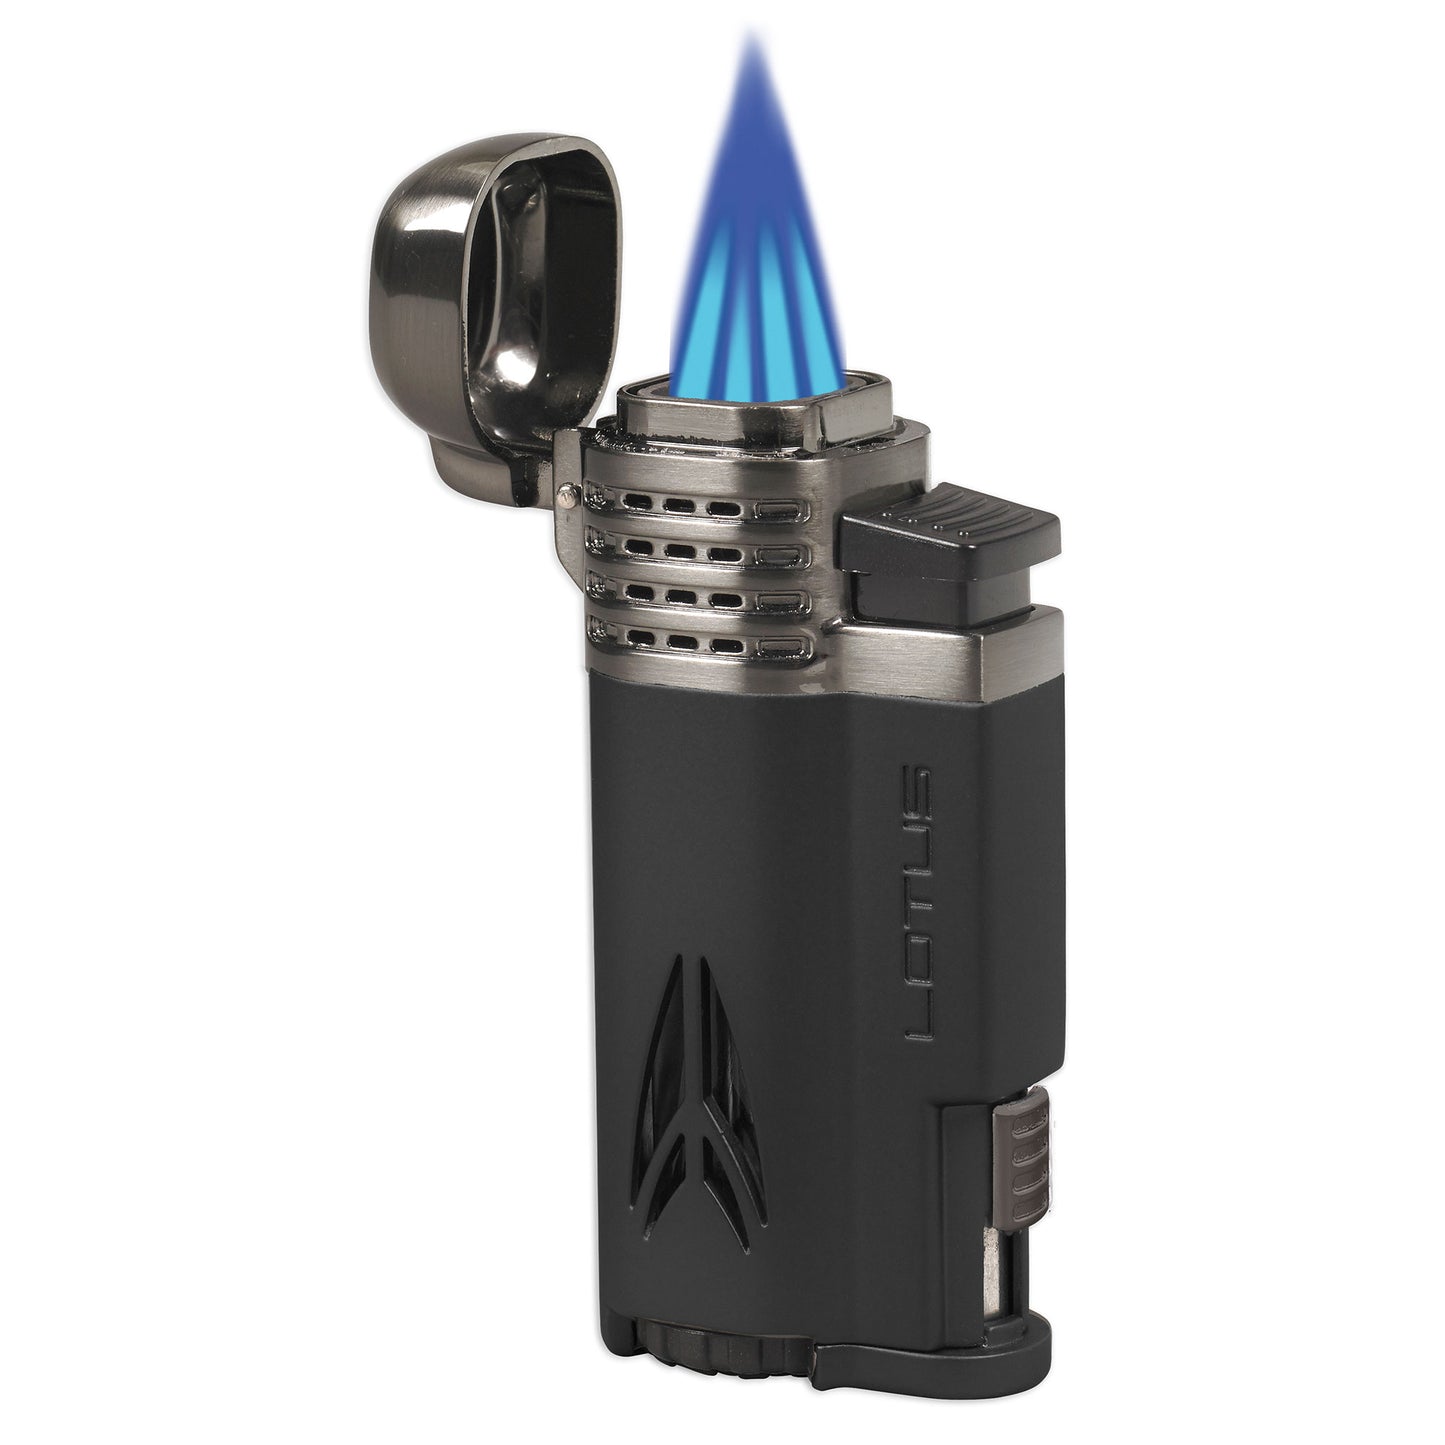 Defiant Twin Pinpoint Lighter by LOTUS